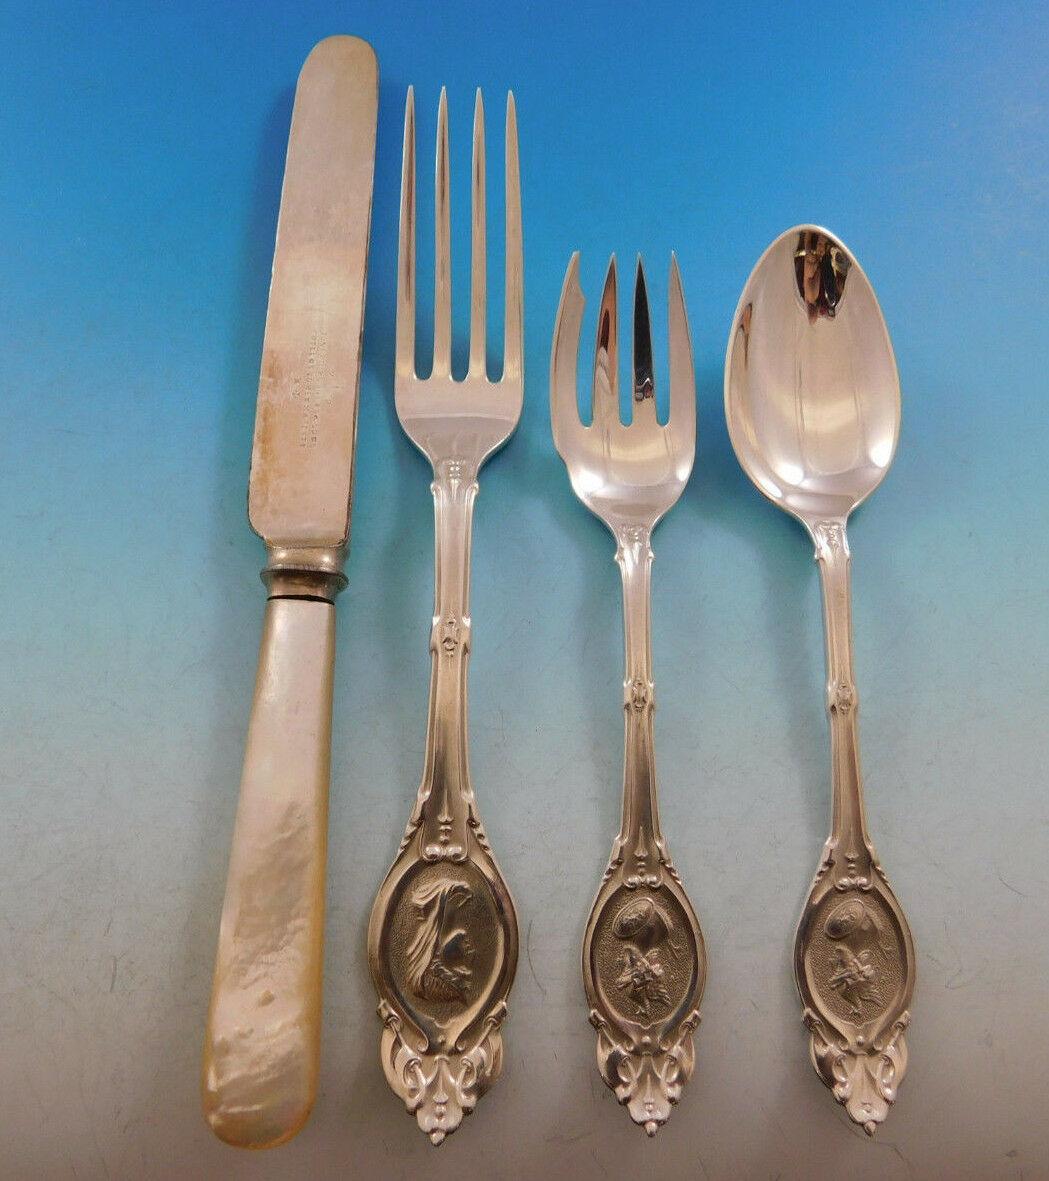 20th Century Medallion by Shiebler Sterling Silver Flatware Service Set 181 Pieces Dinner